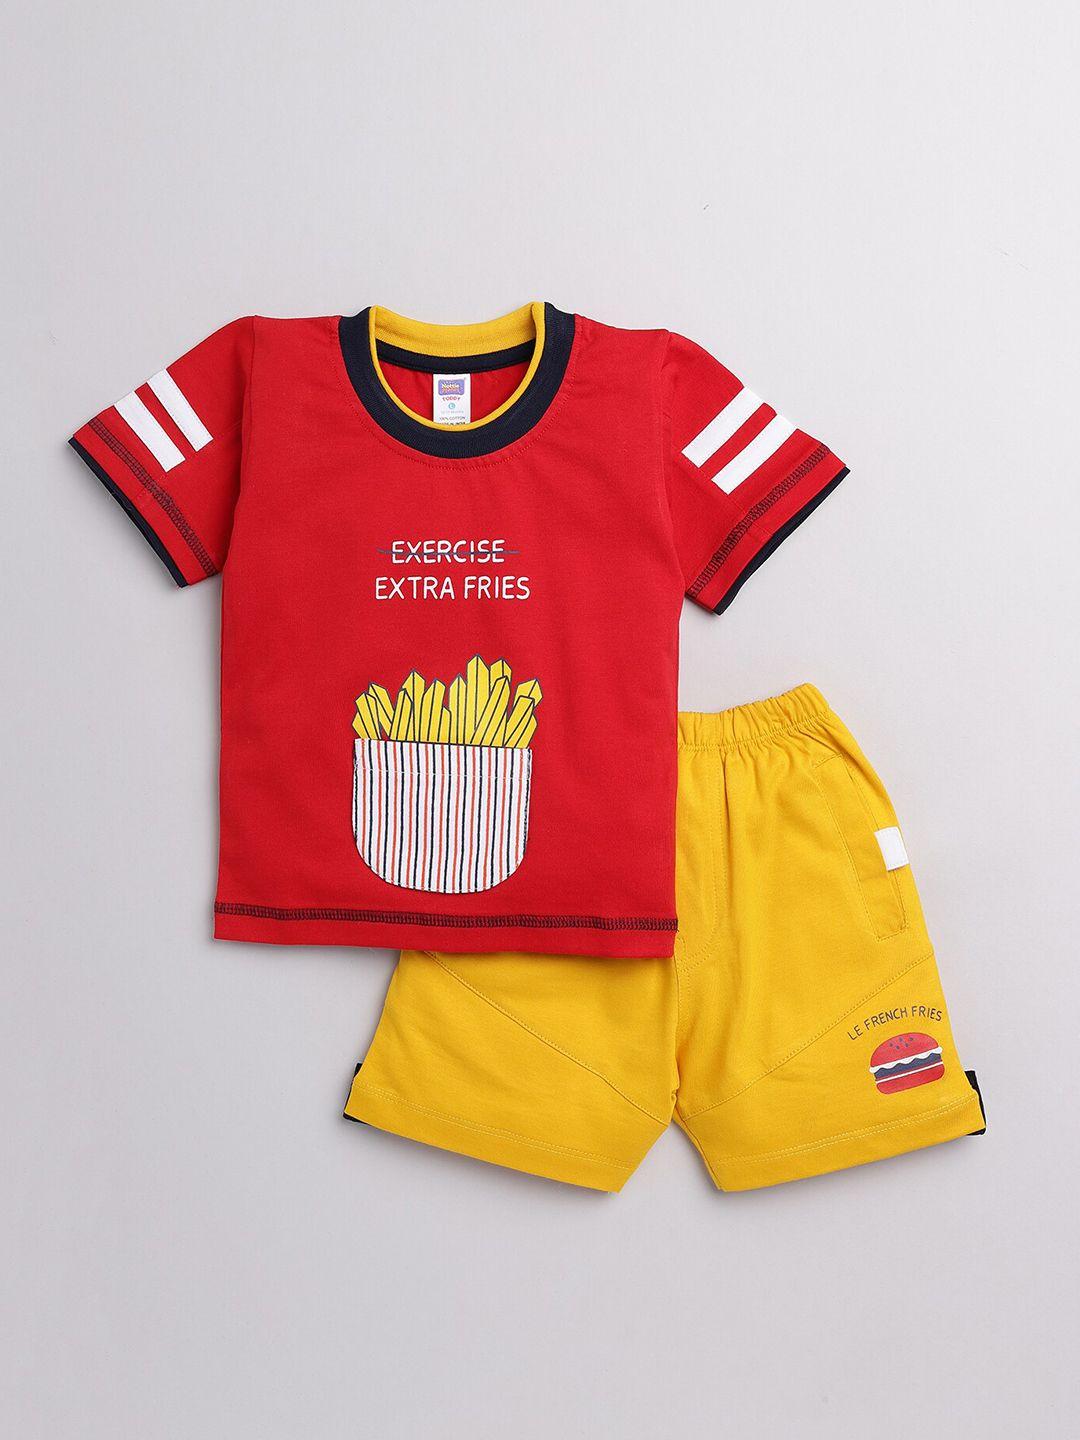 nottie planet boys red & yellow printed pure cotton t-shirt with shorts